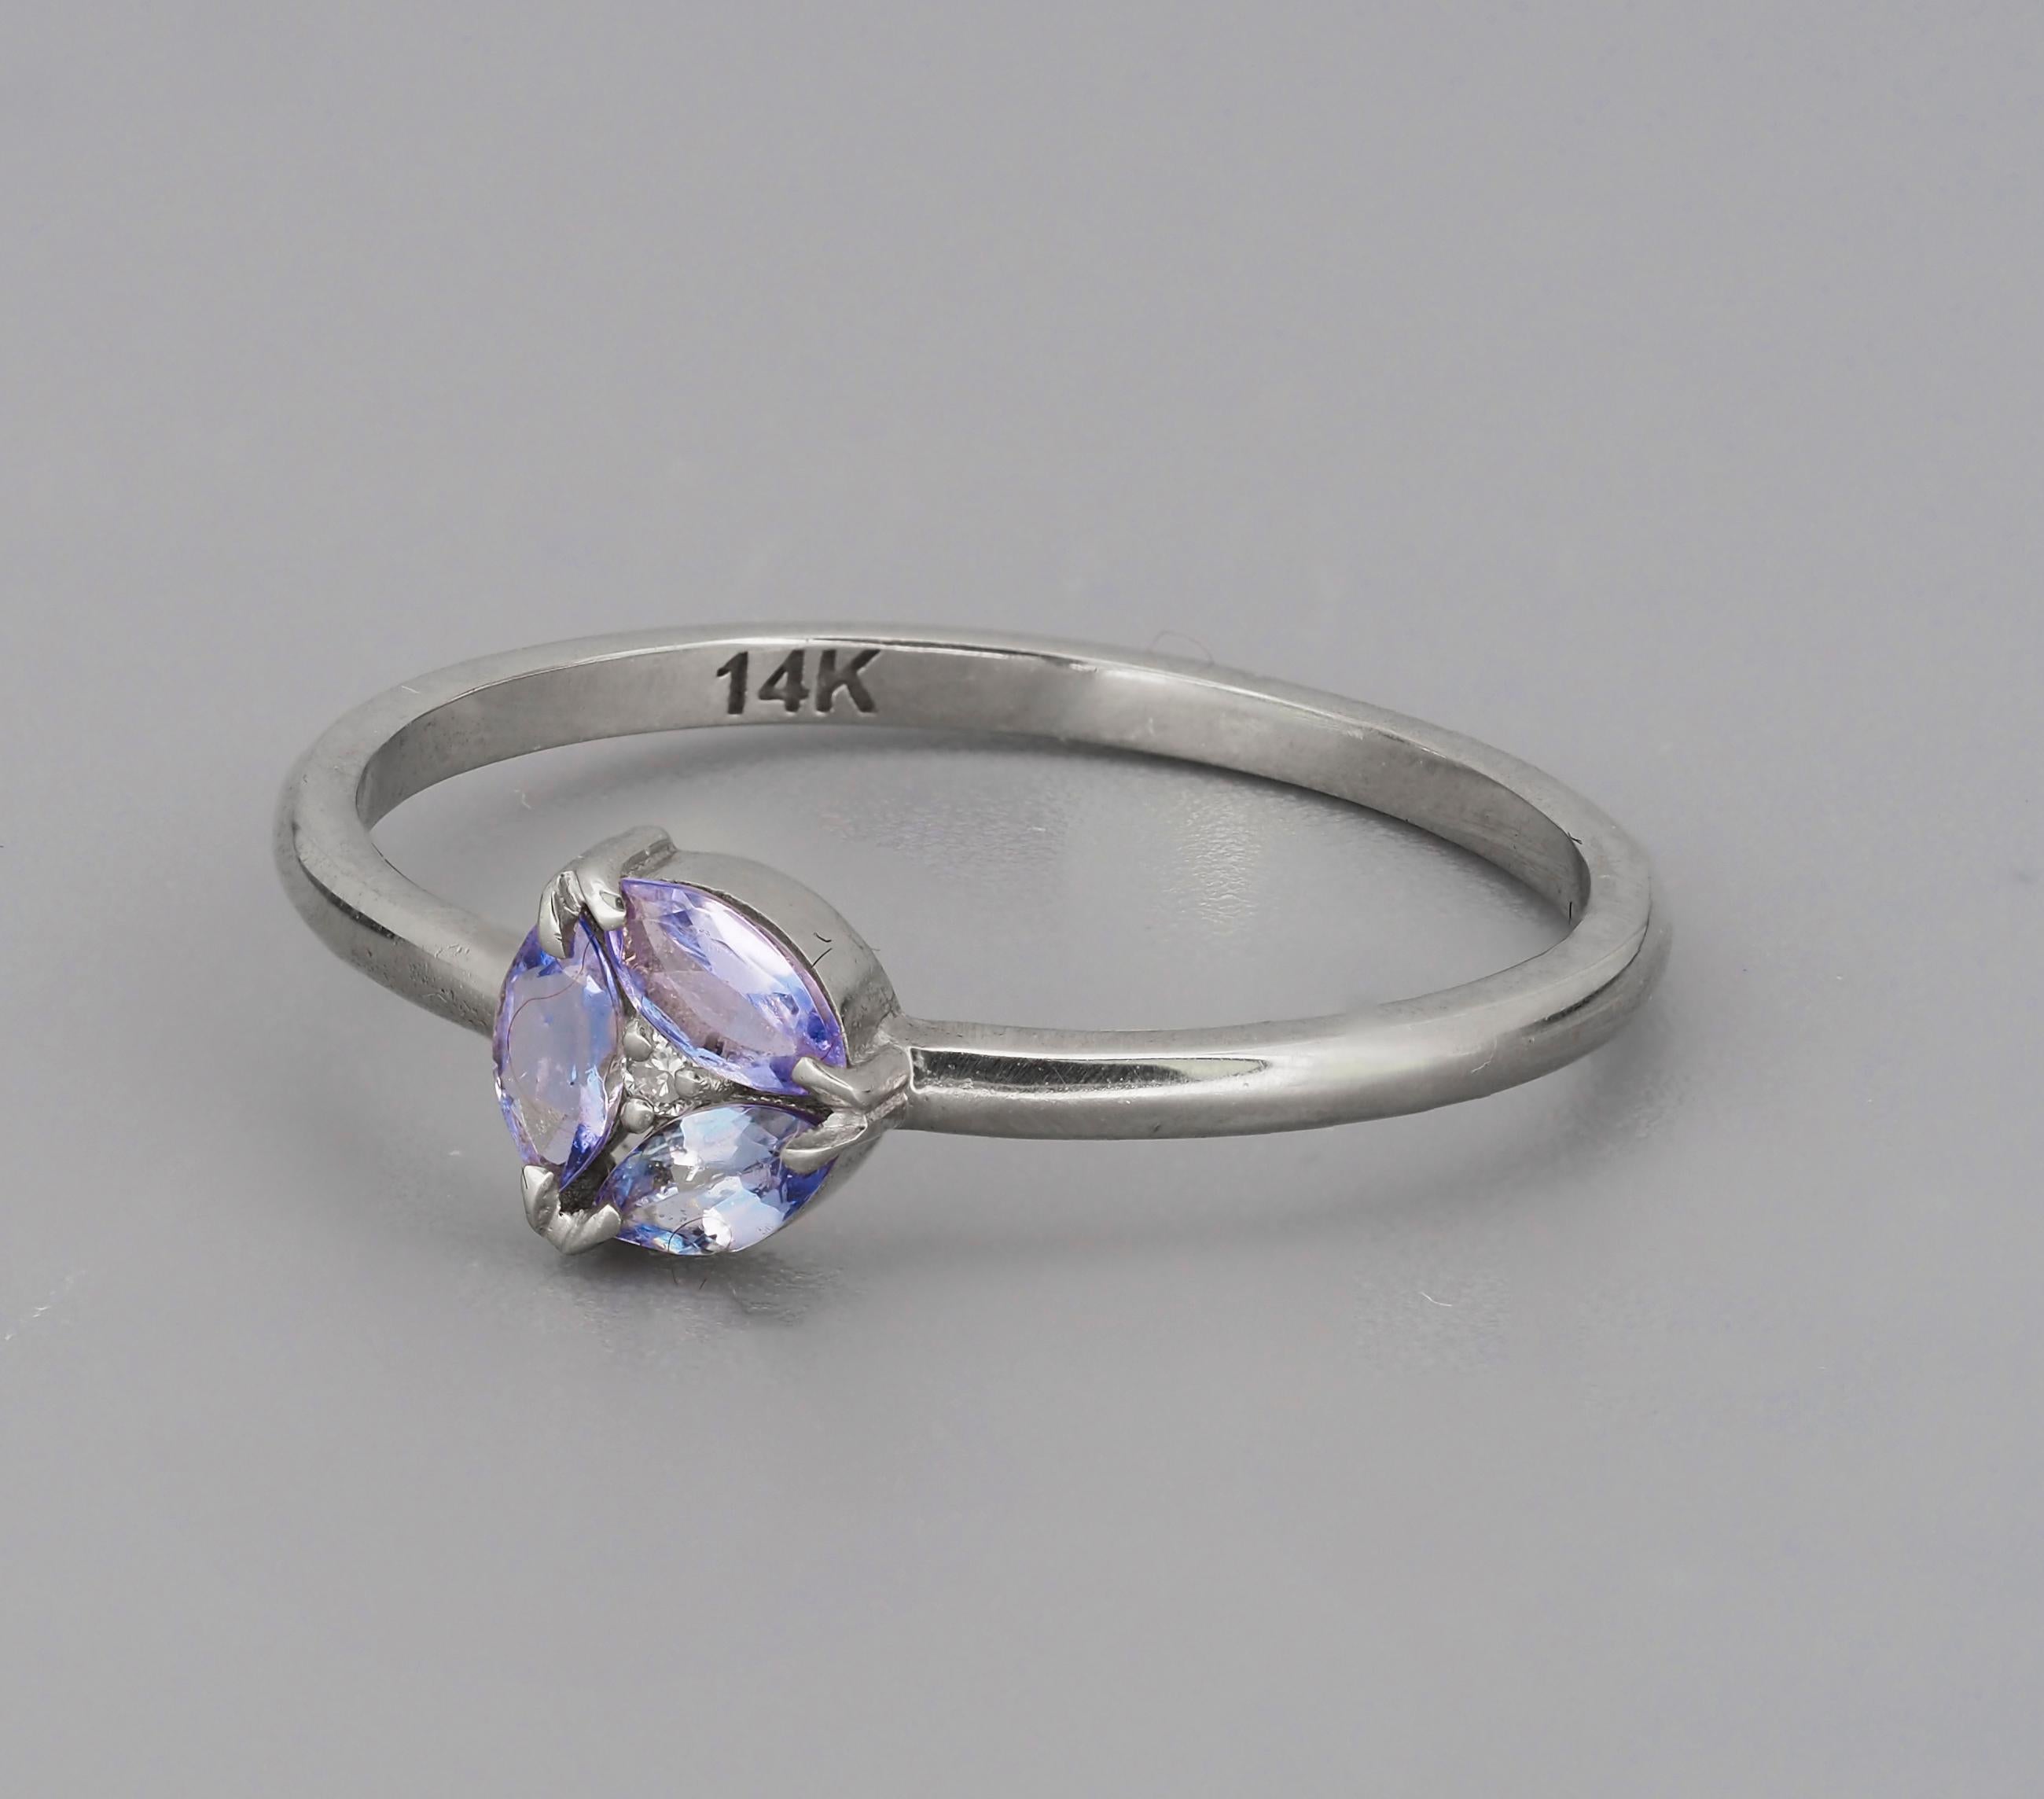 For Sale:  14k Gold Ring with Marquise Tanzanite and Diamonds 4